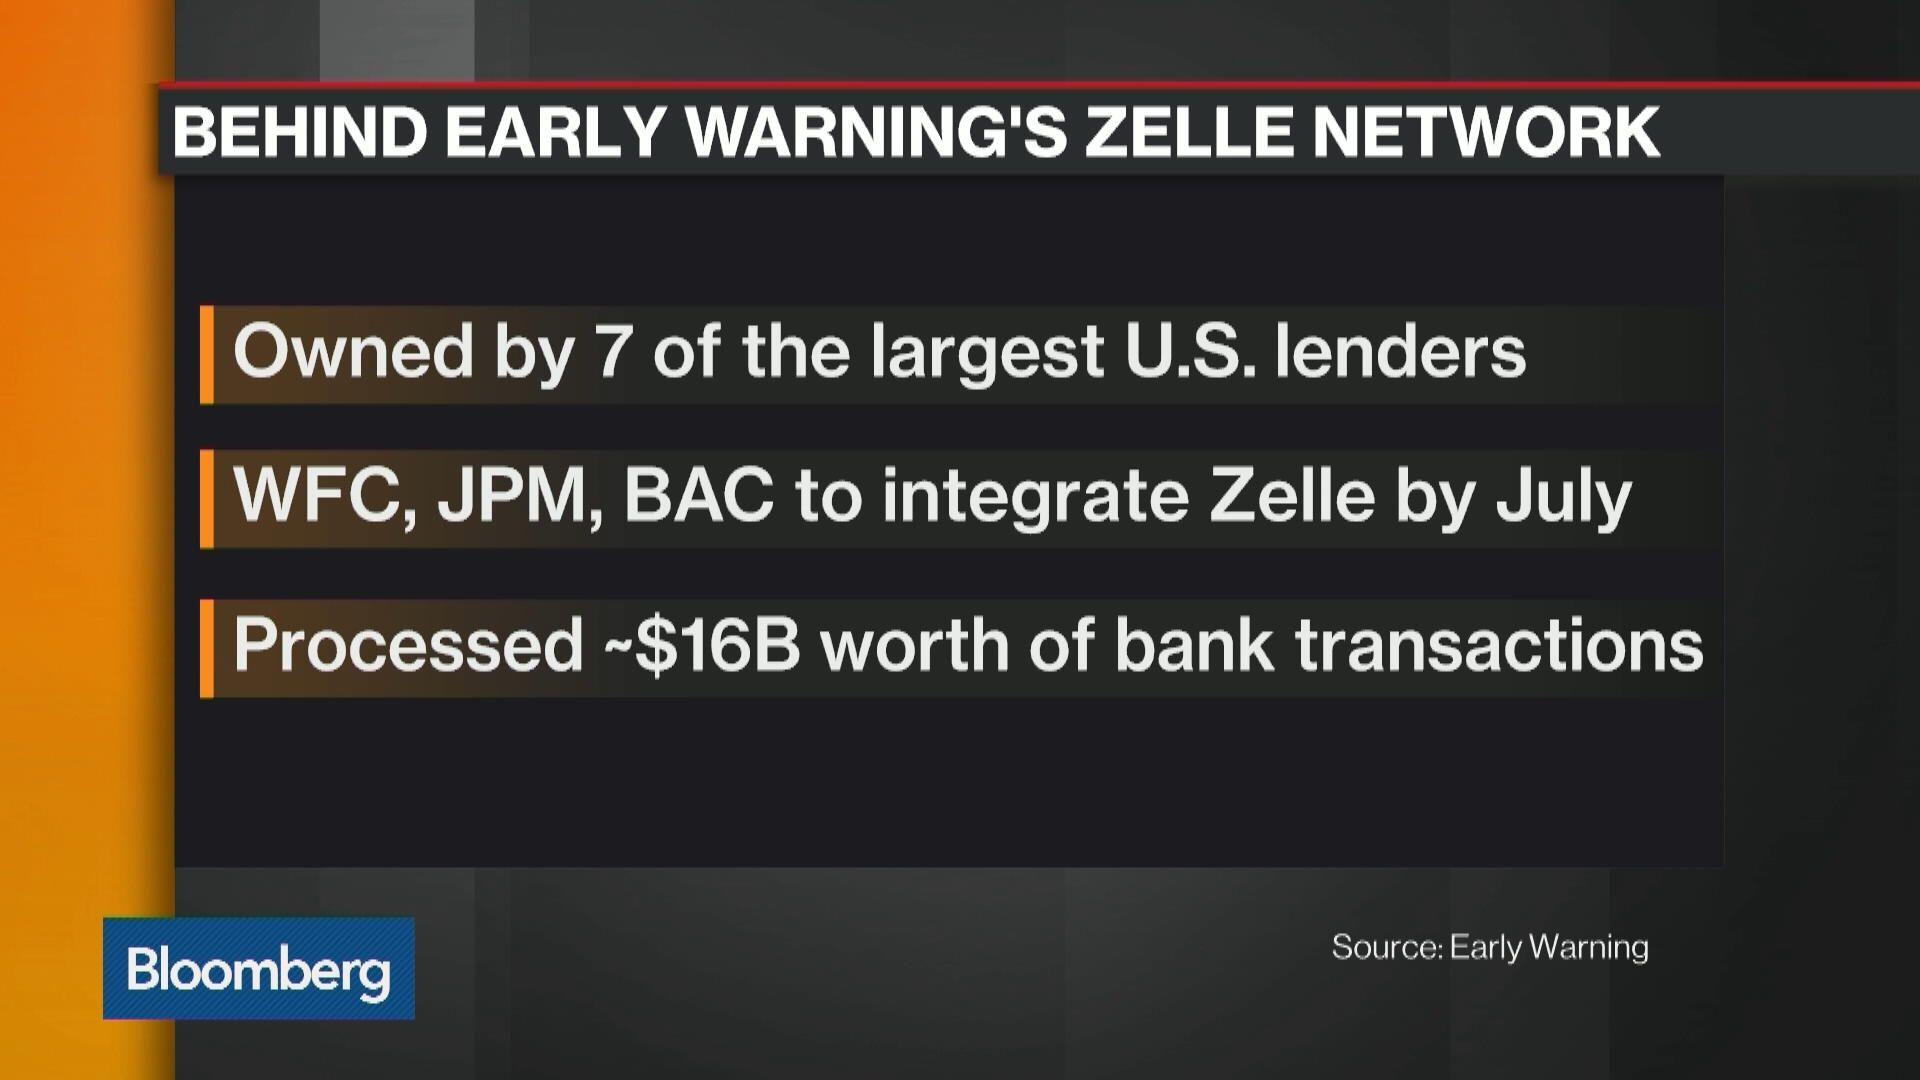 Zell Early Warning Logo - Why Early Warning's Zelle Network Could Be a Venmo Killer – Bloomberg